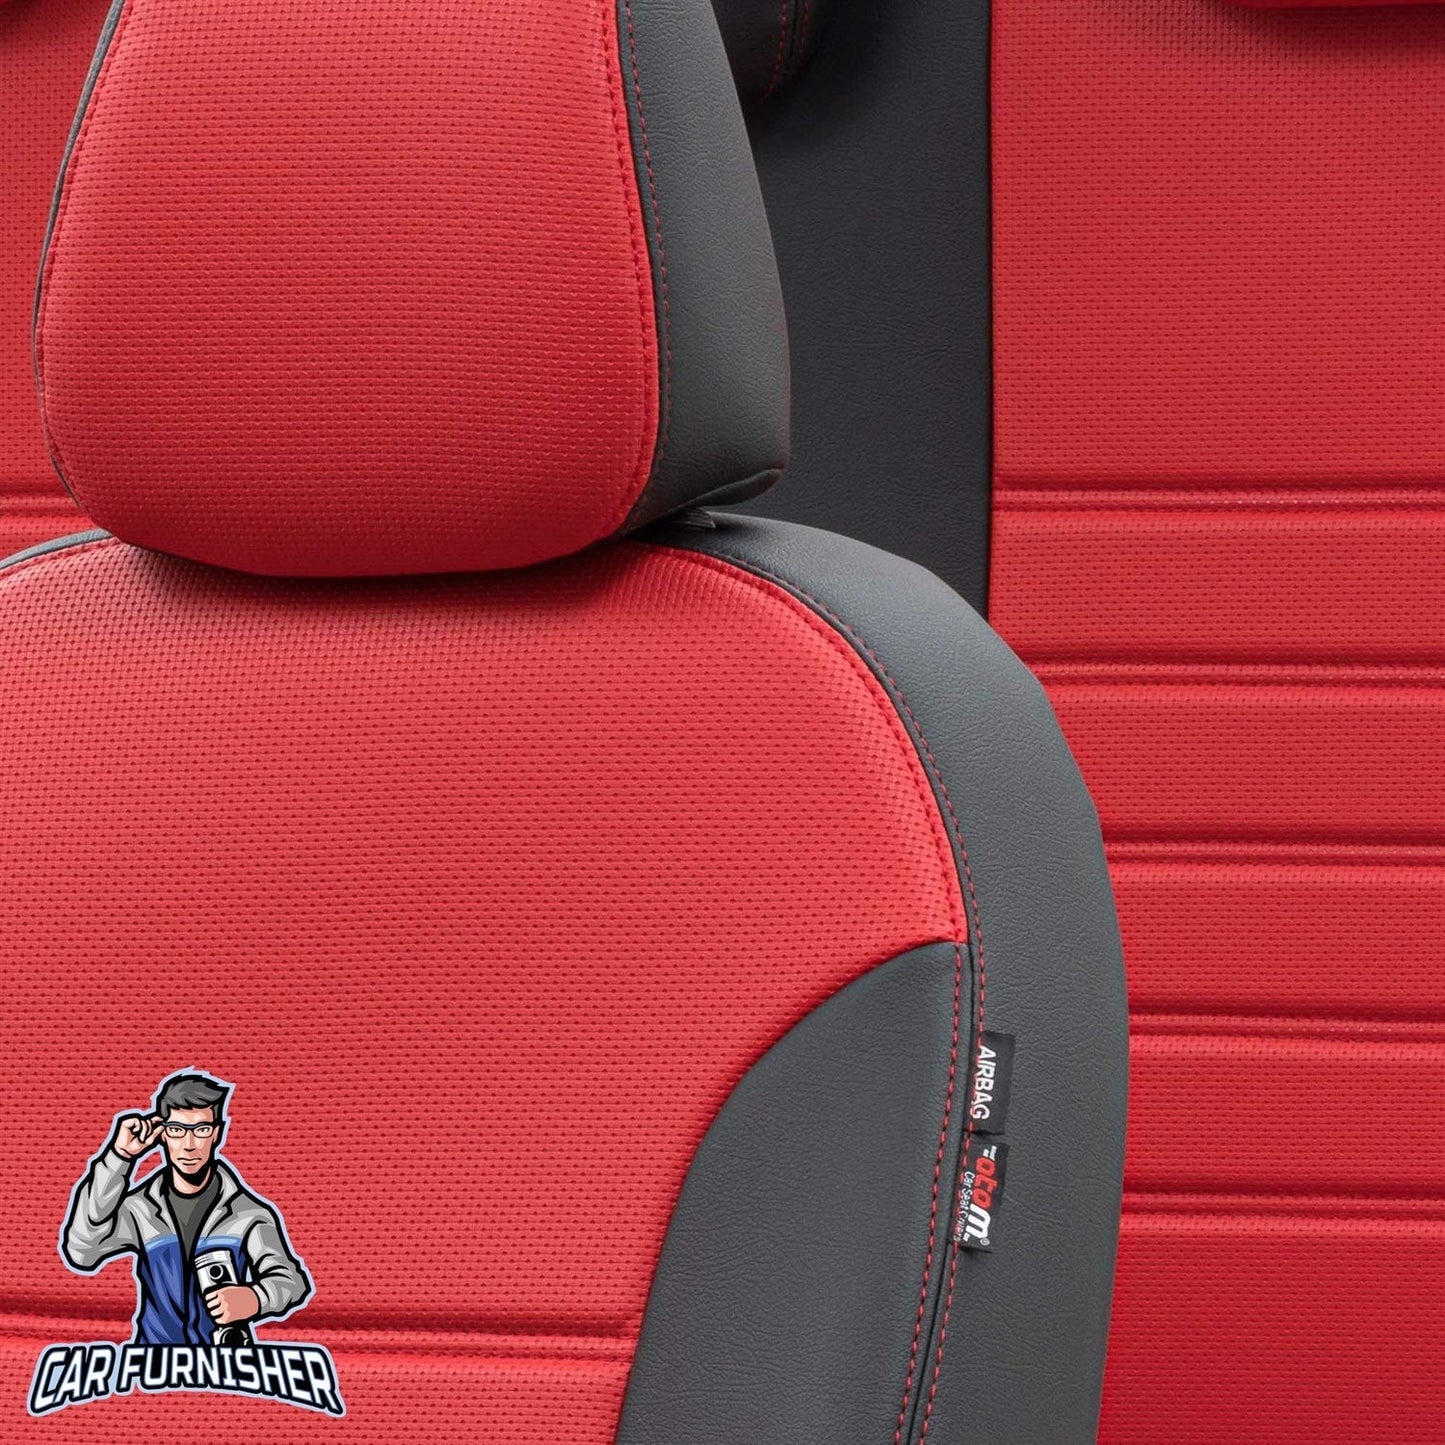 Skoda Kamiq Seat Covers New York Leather Design Red Leather